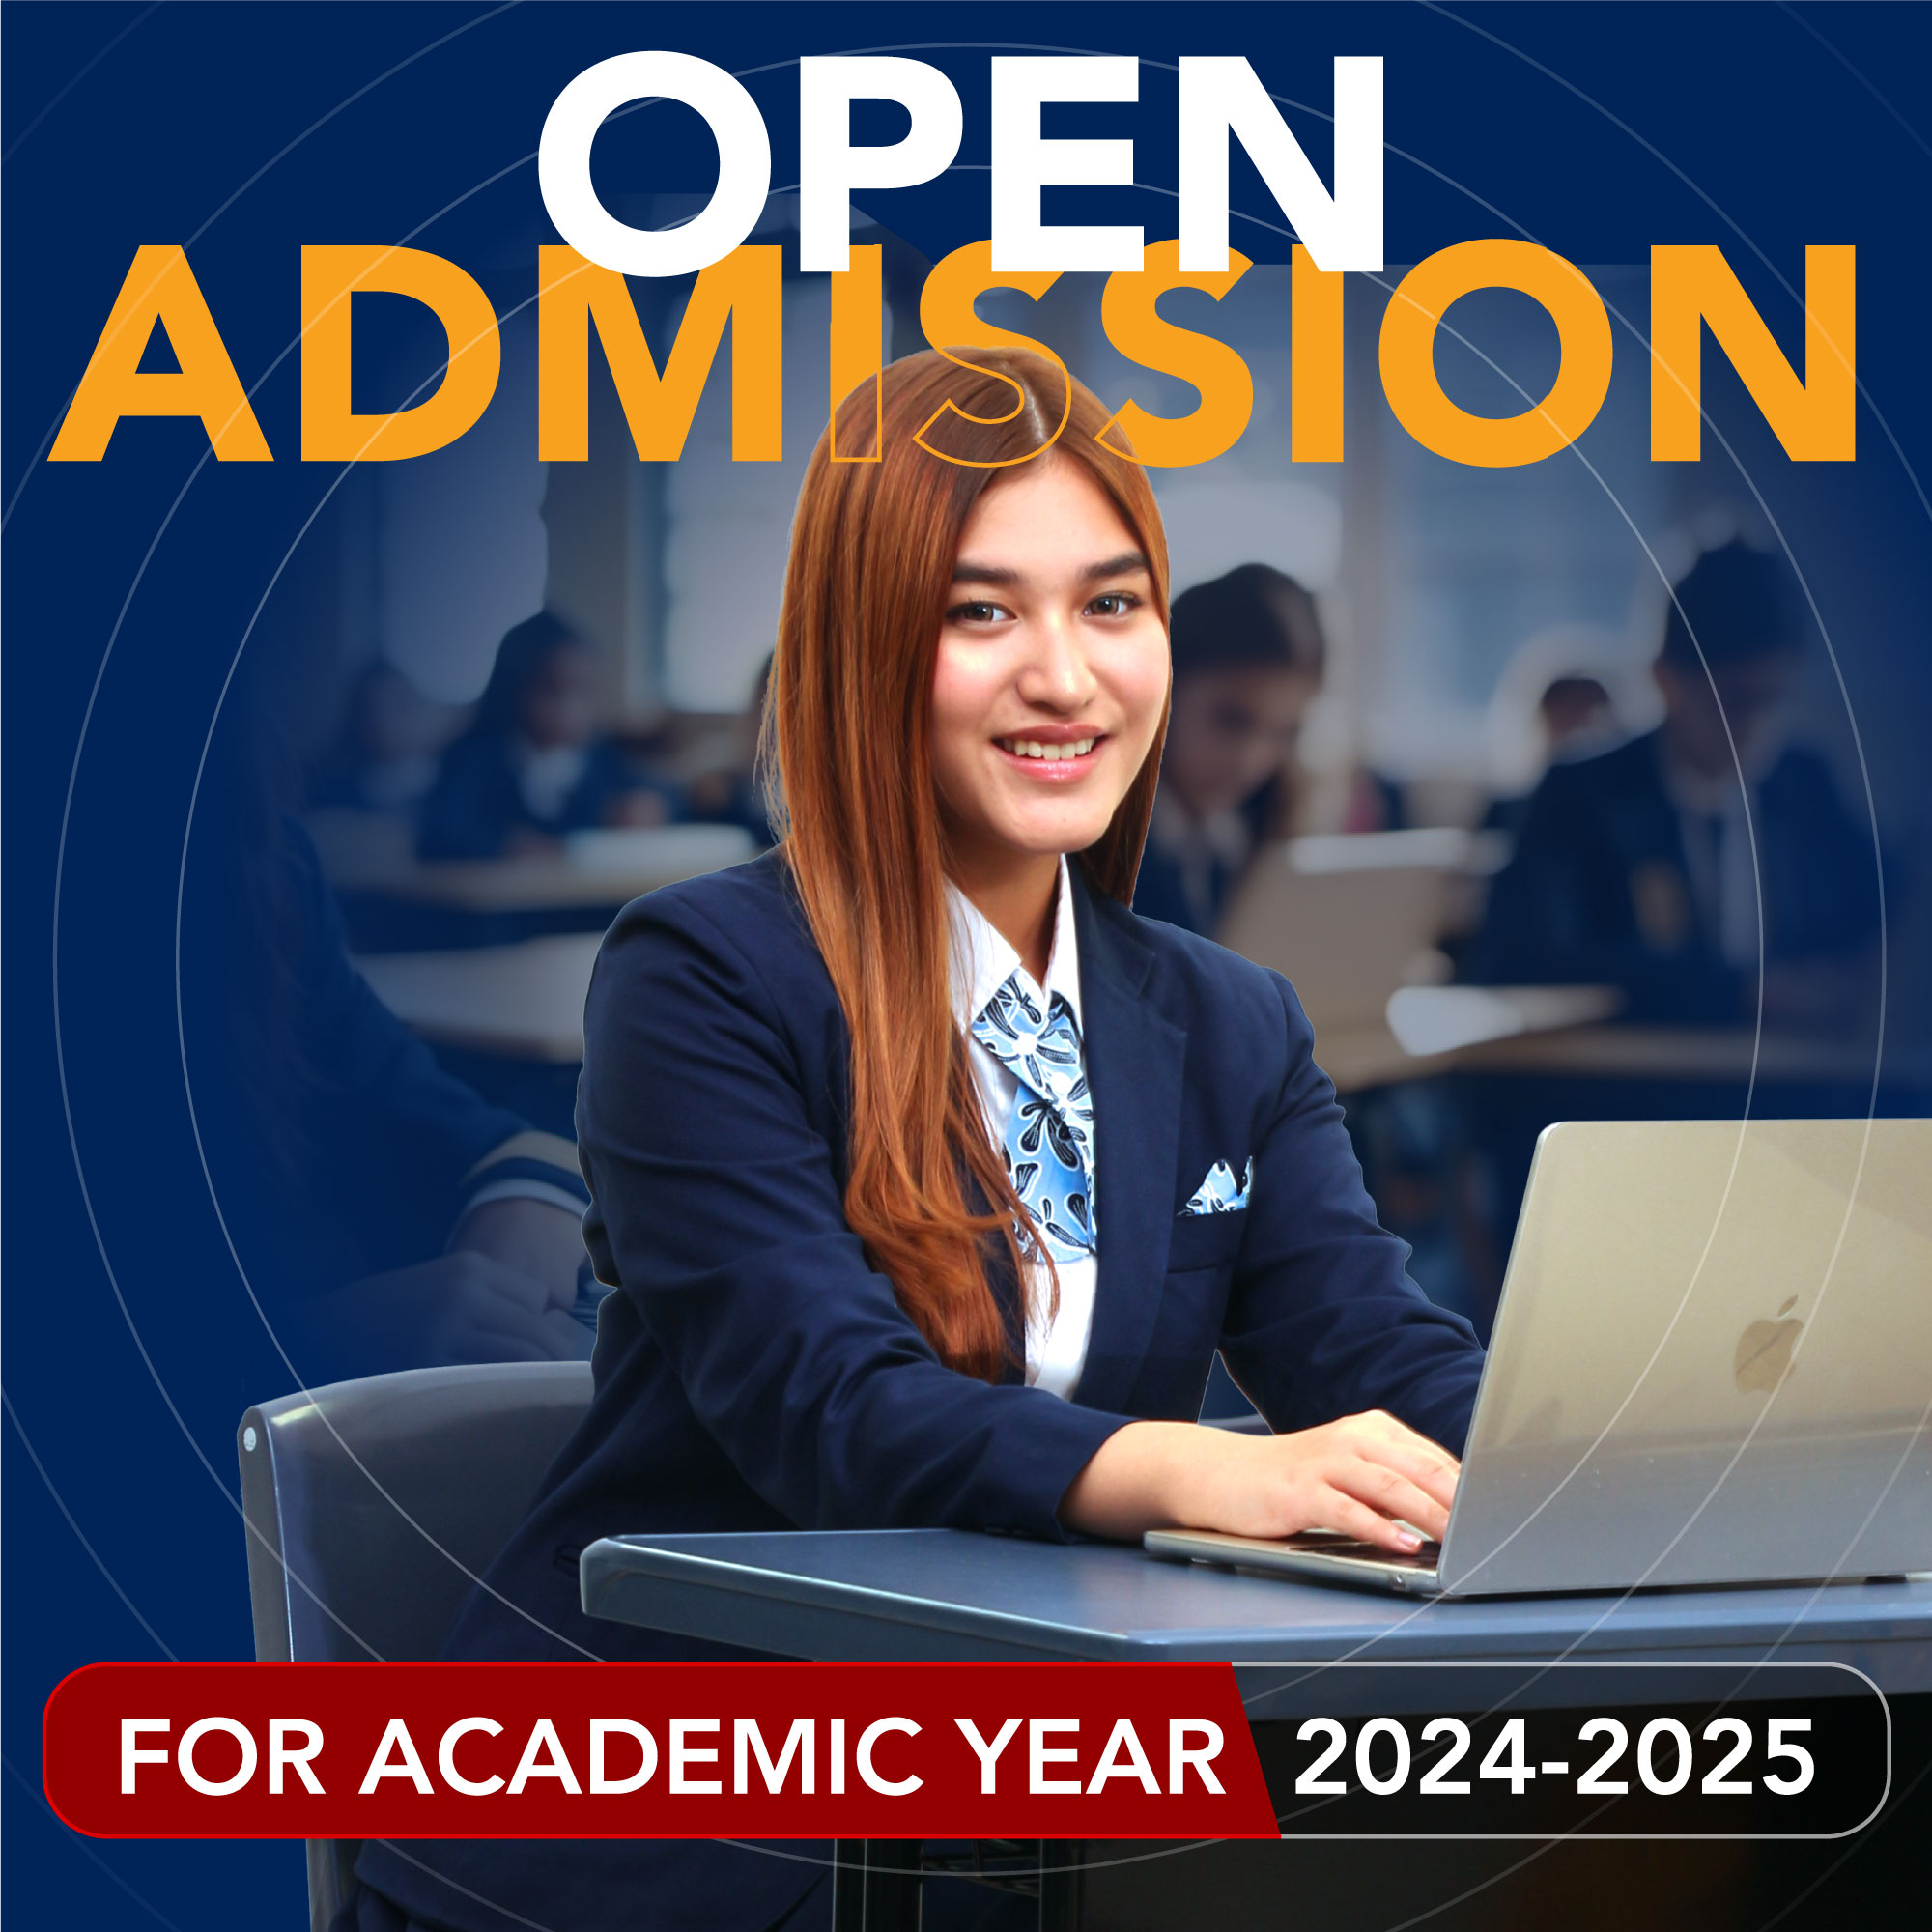 SIS-PIK Open Admission for Academic Year 2024-2025